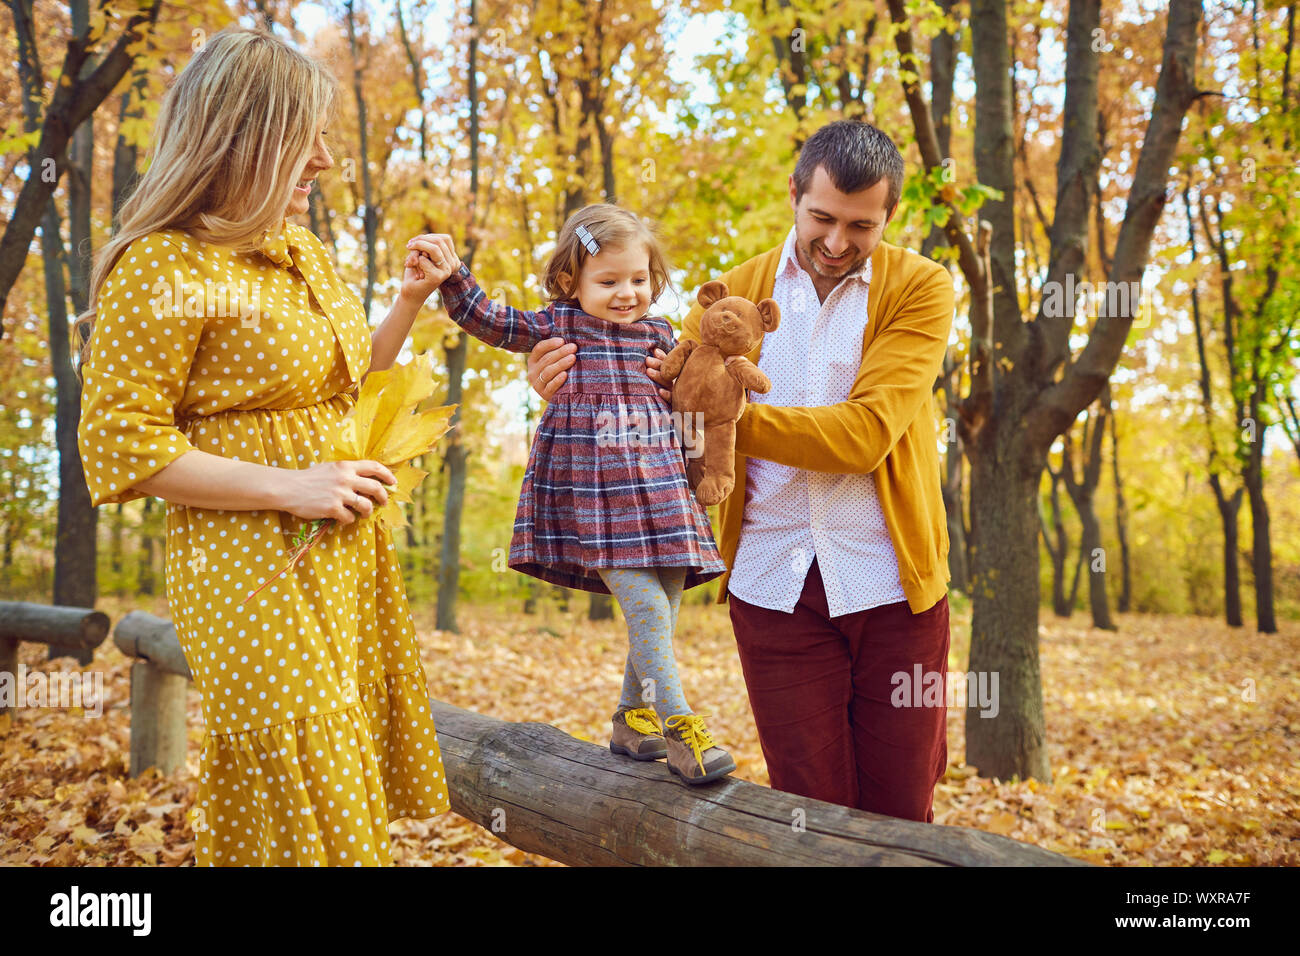 Family playing with their daughter on nature in the fall Stock Photo